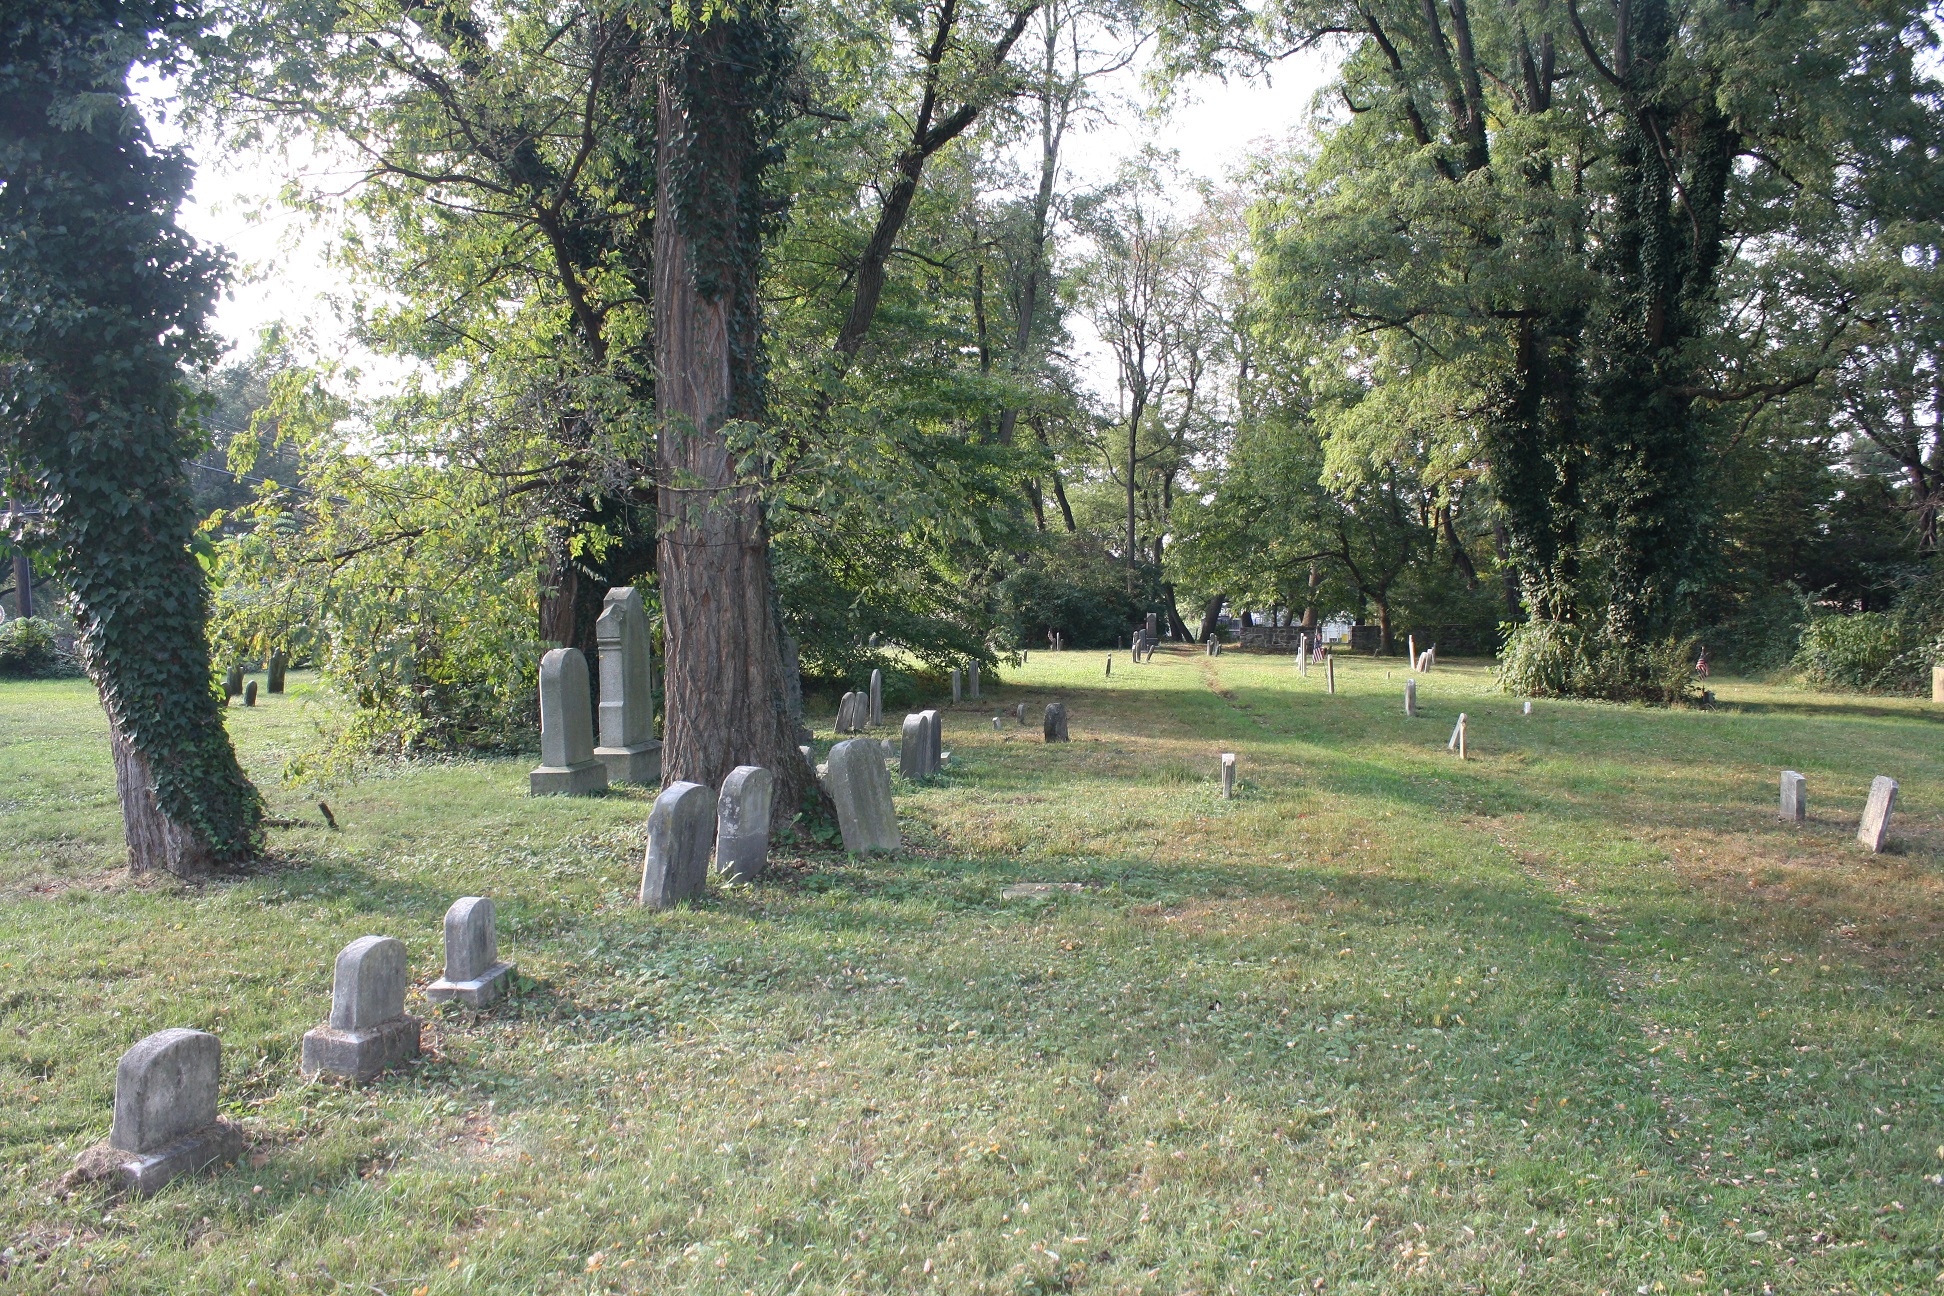 Looking across a cemetery.